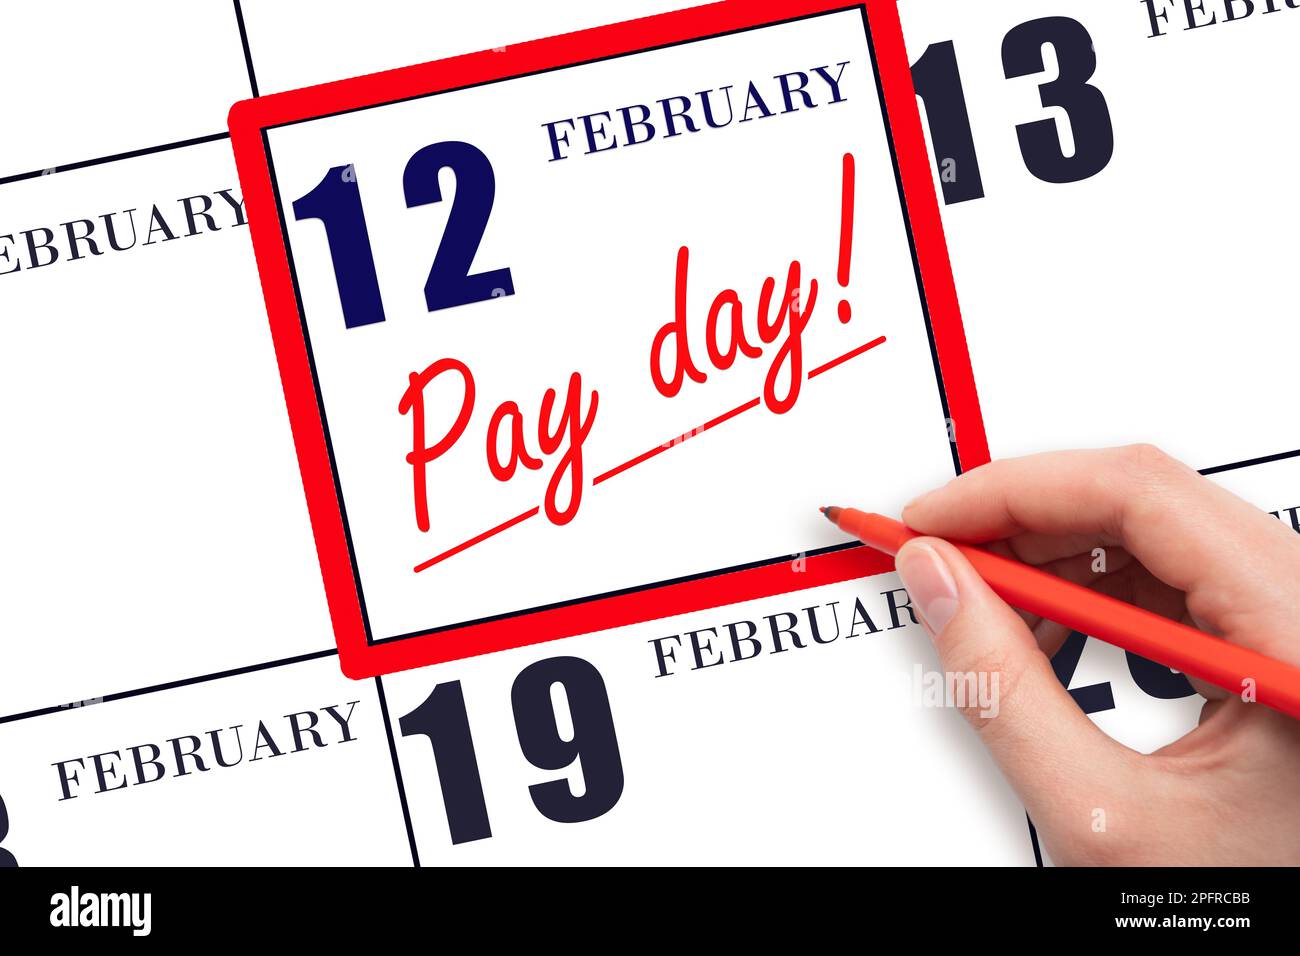 12th day of February. Hand writing text PAY DATE on calendar date February 12 and underline it. Payment due date.  Reminder concept of payment. Winter Stock Photo